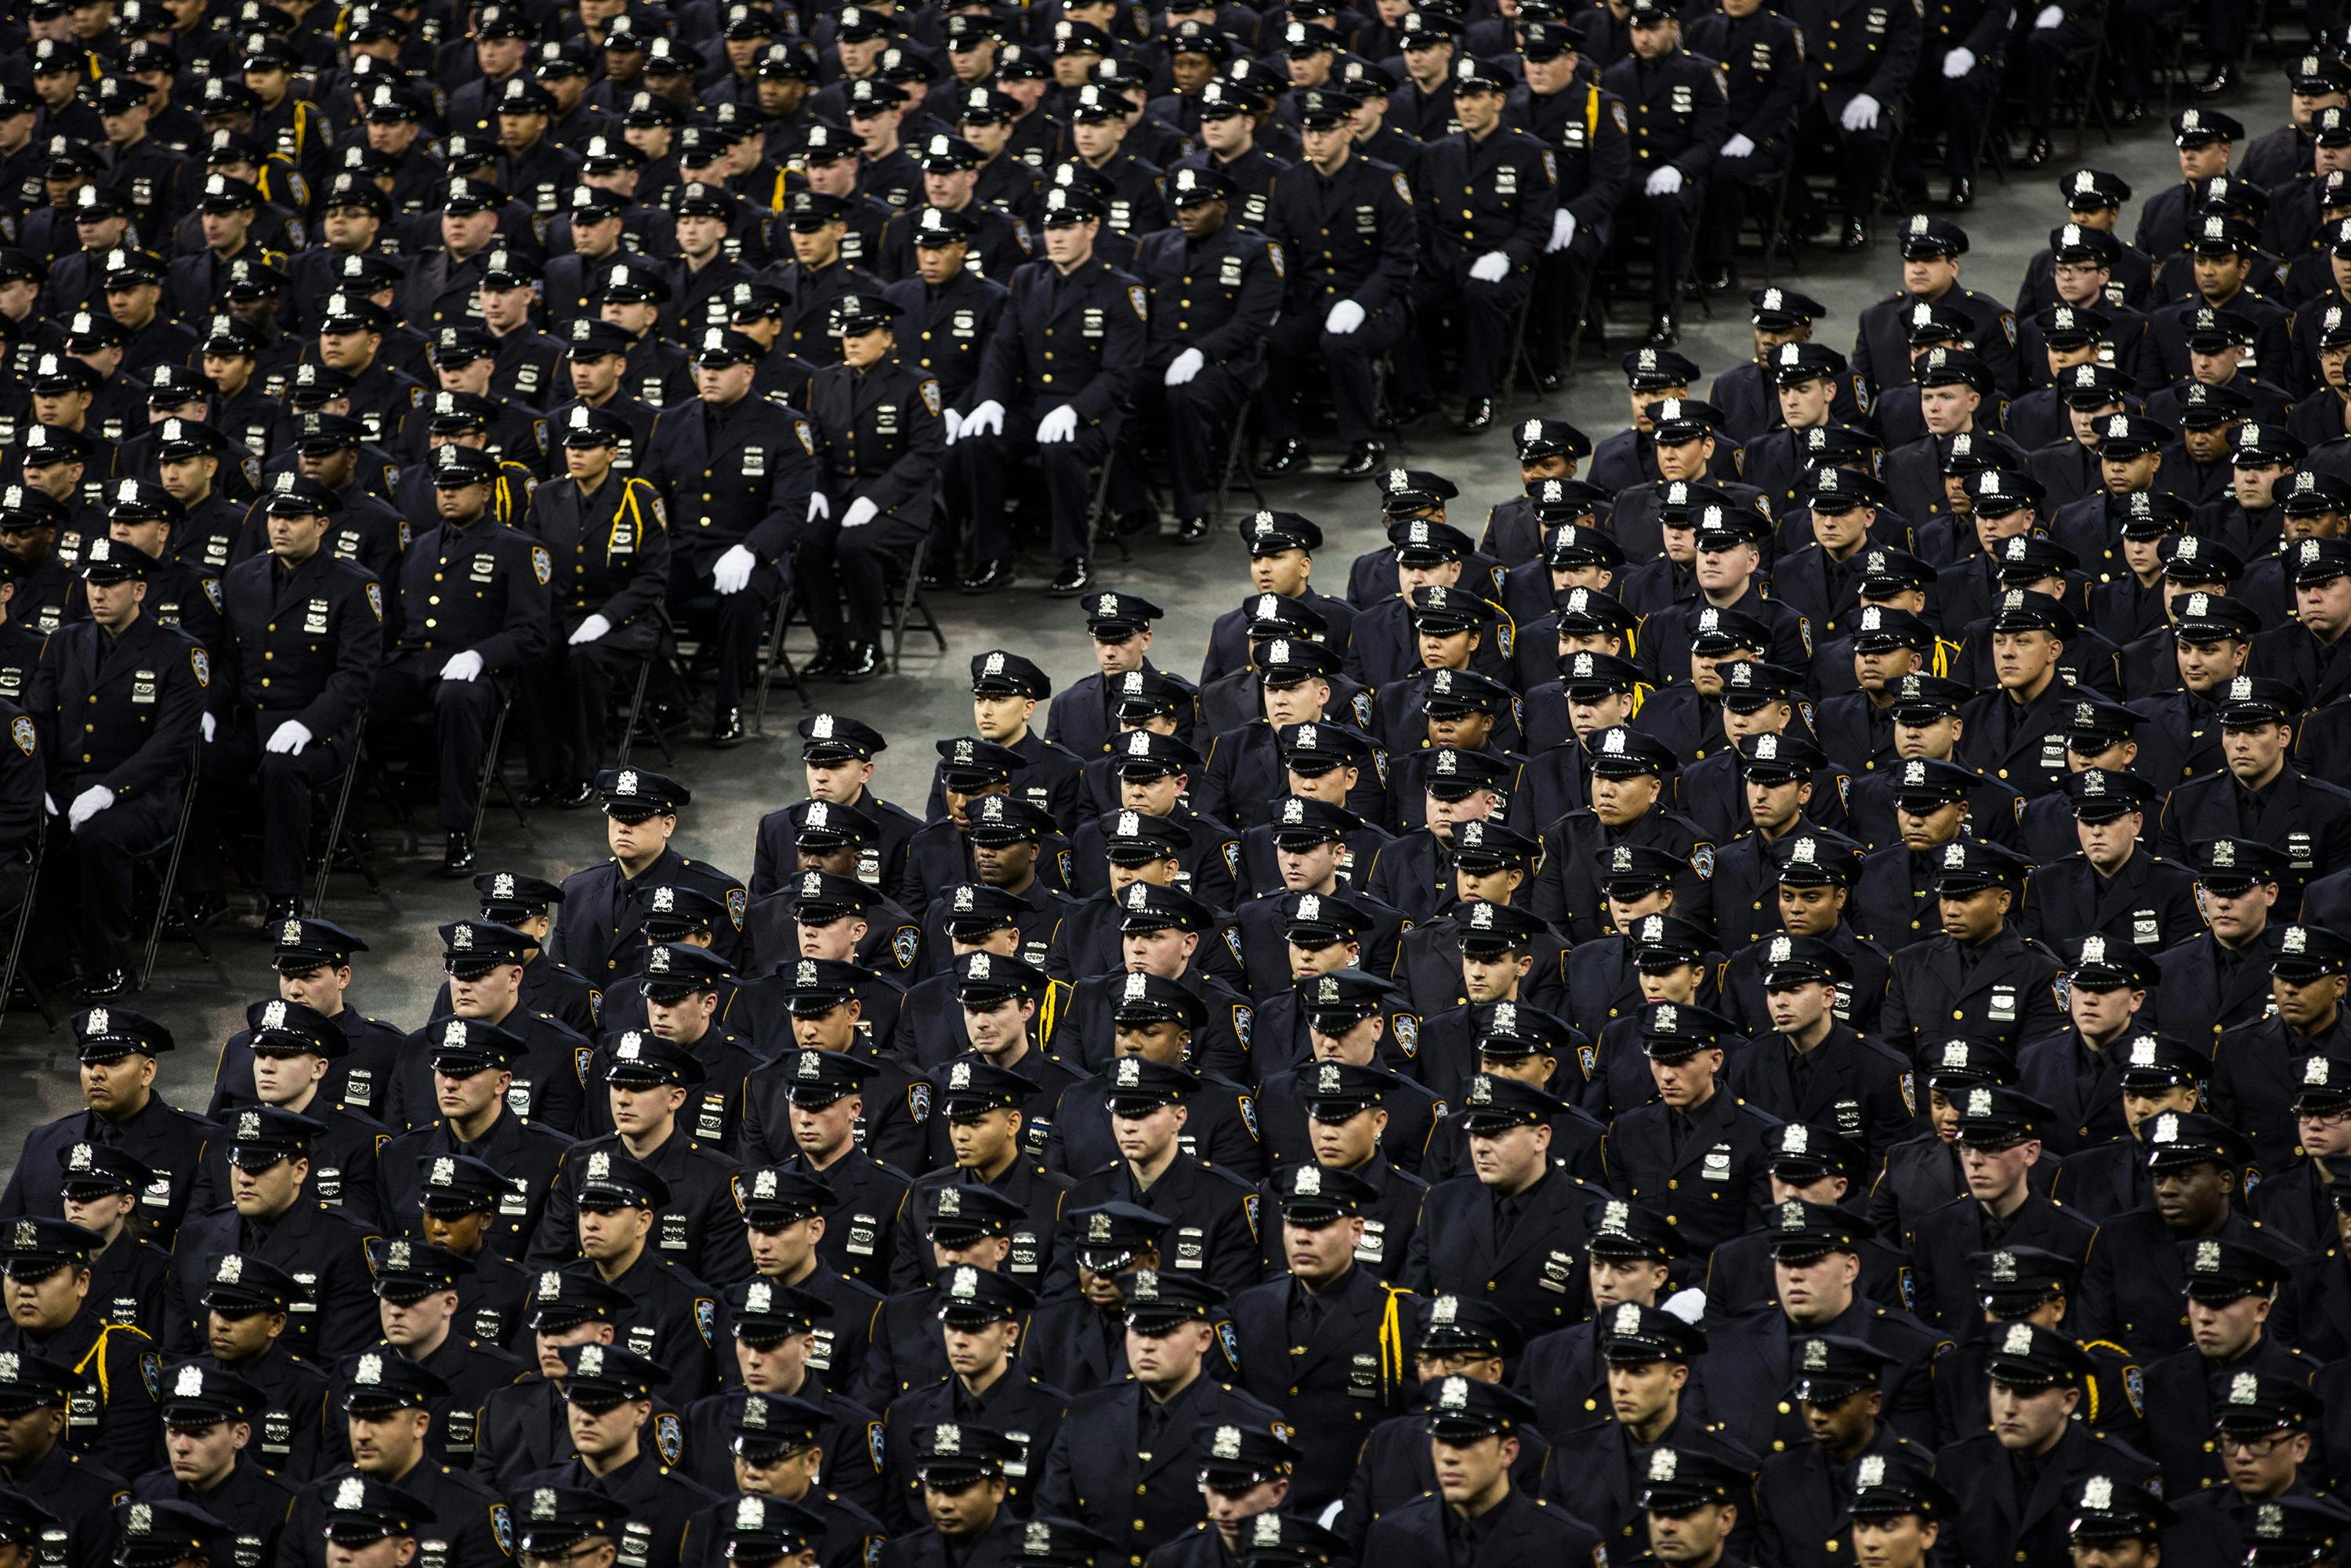 100,000 New Cops? There Are Far Better Ways to Fight Crime.